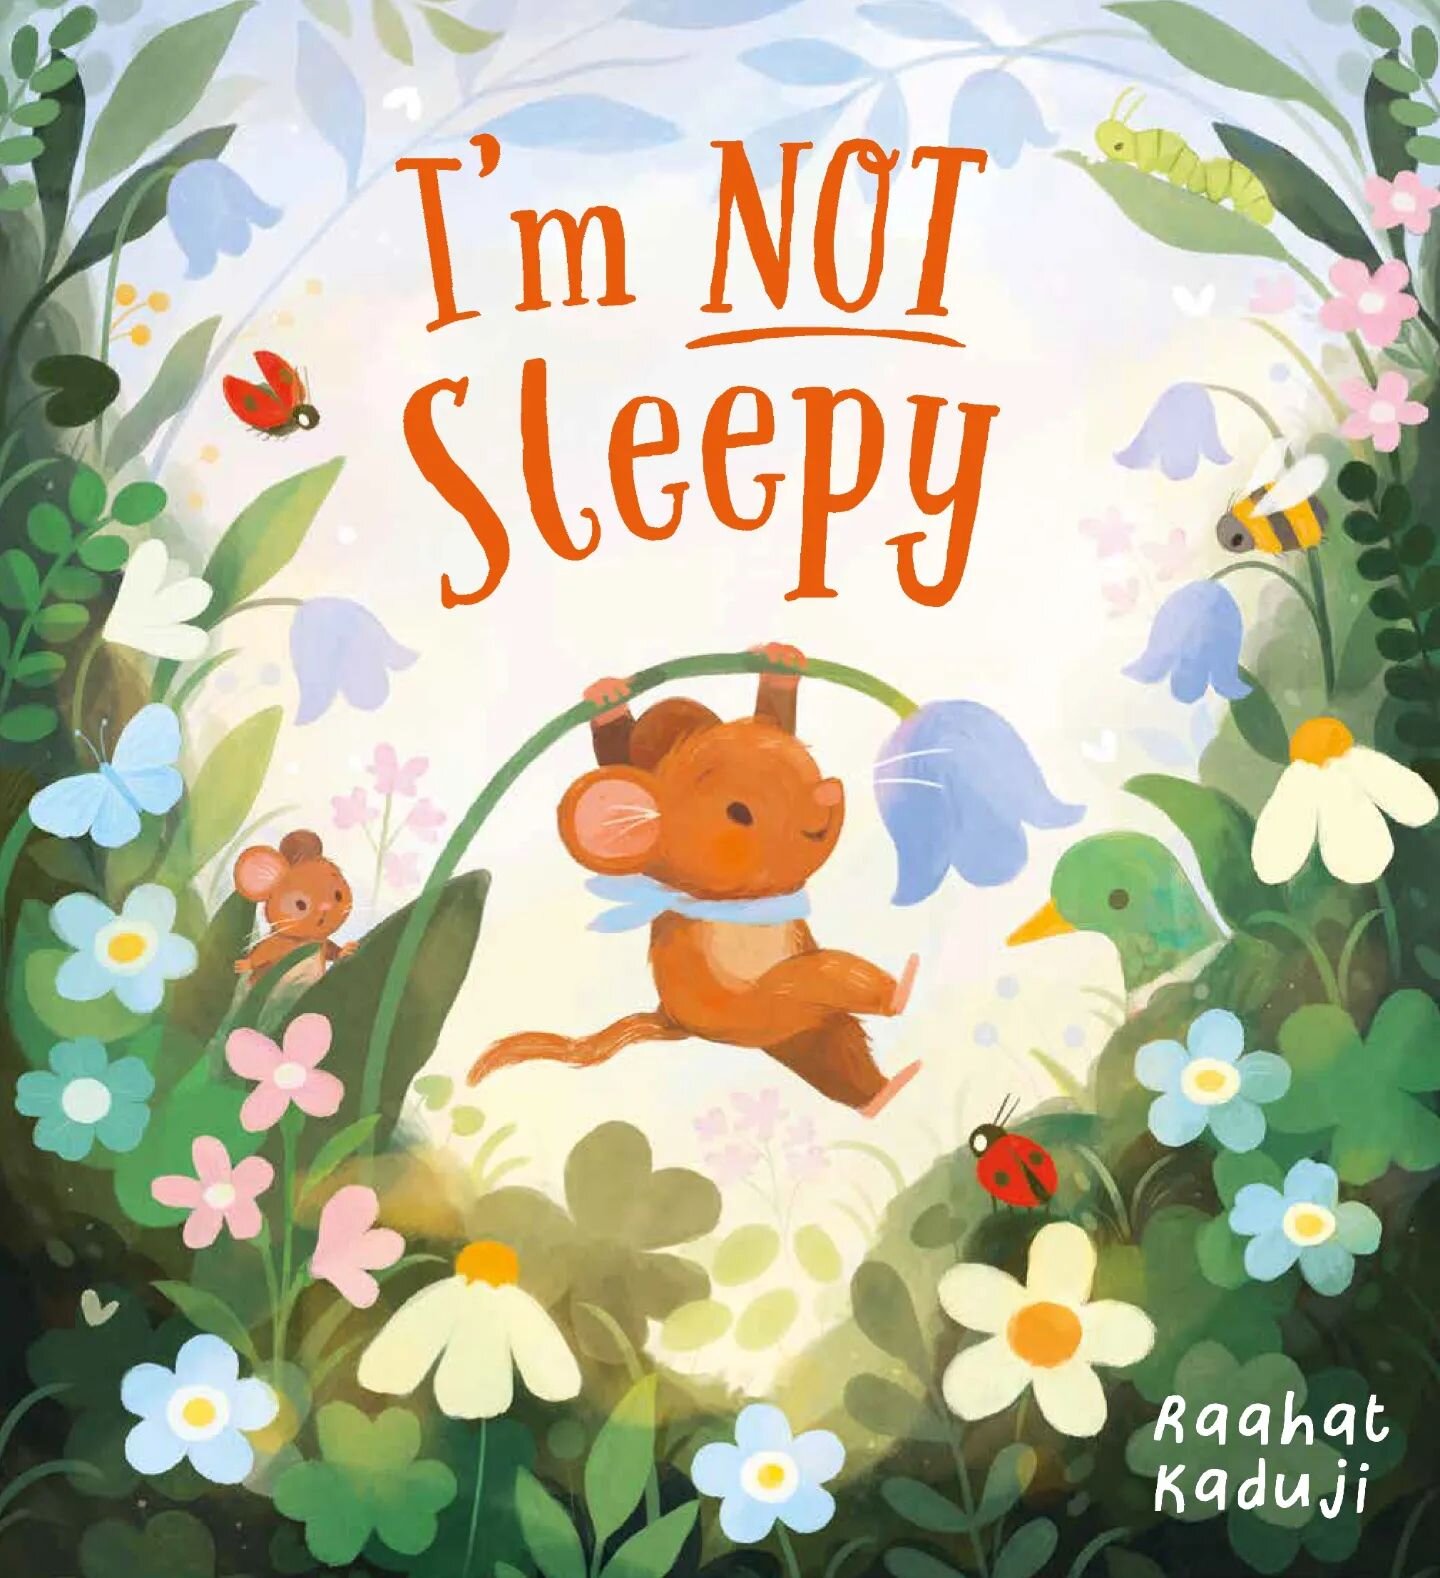 🌟 COVER REVEAL 🌟
I'm delighted to officially introduce you to my second author-illustrator picture book, I'm Not Sleepy! Publishing on 14 March 2024 with Alison Green Books of @scholastic_uk. 

Pre orders are available now (link in my bio) 🔗

&quo